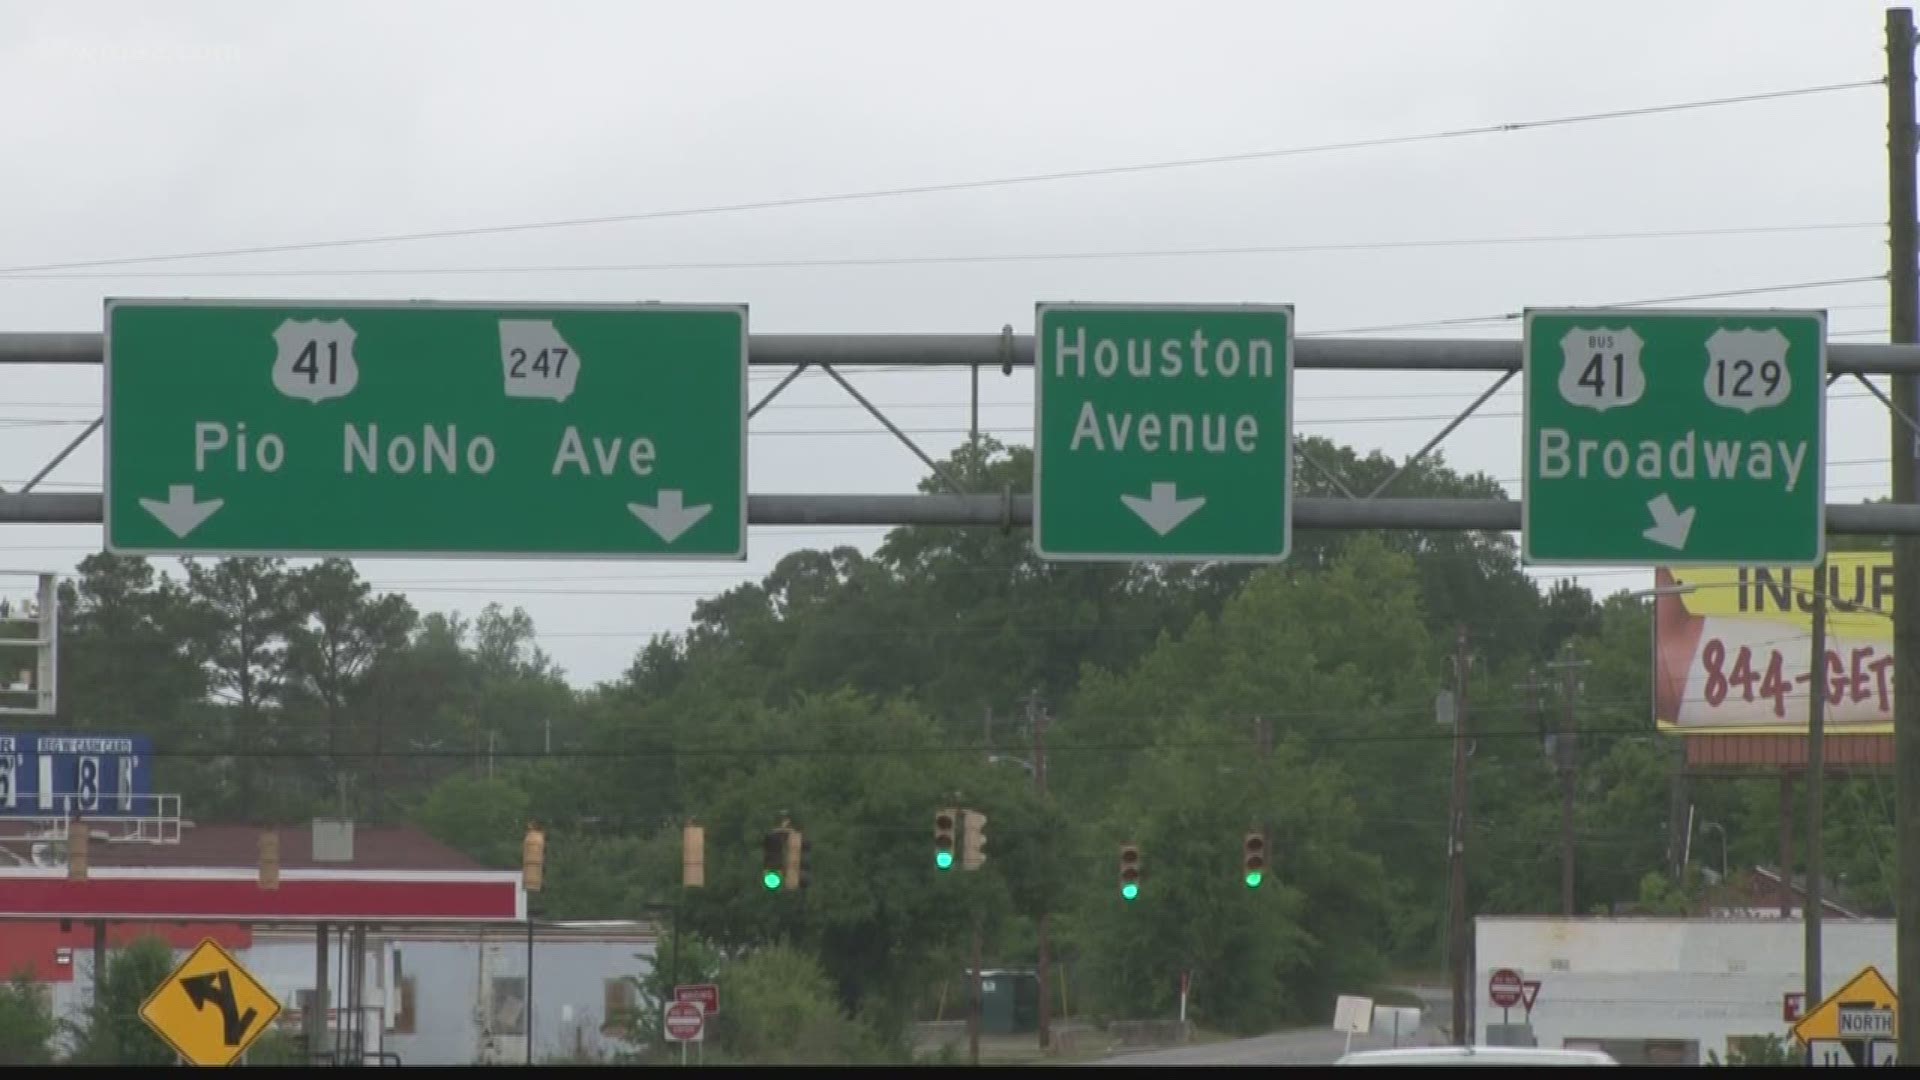 If you're trying to get from Macon to Warner Robins and back, Highway 247 is a popular route. Two years ago, Bibb County commissioners asked the Georgia Department of Transportation to put a roundabout near the intersection of Pio Nono and Houston Avenue, but construction still hasn't started.